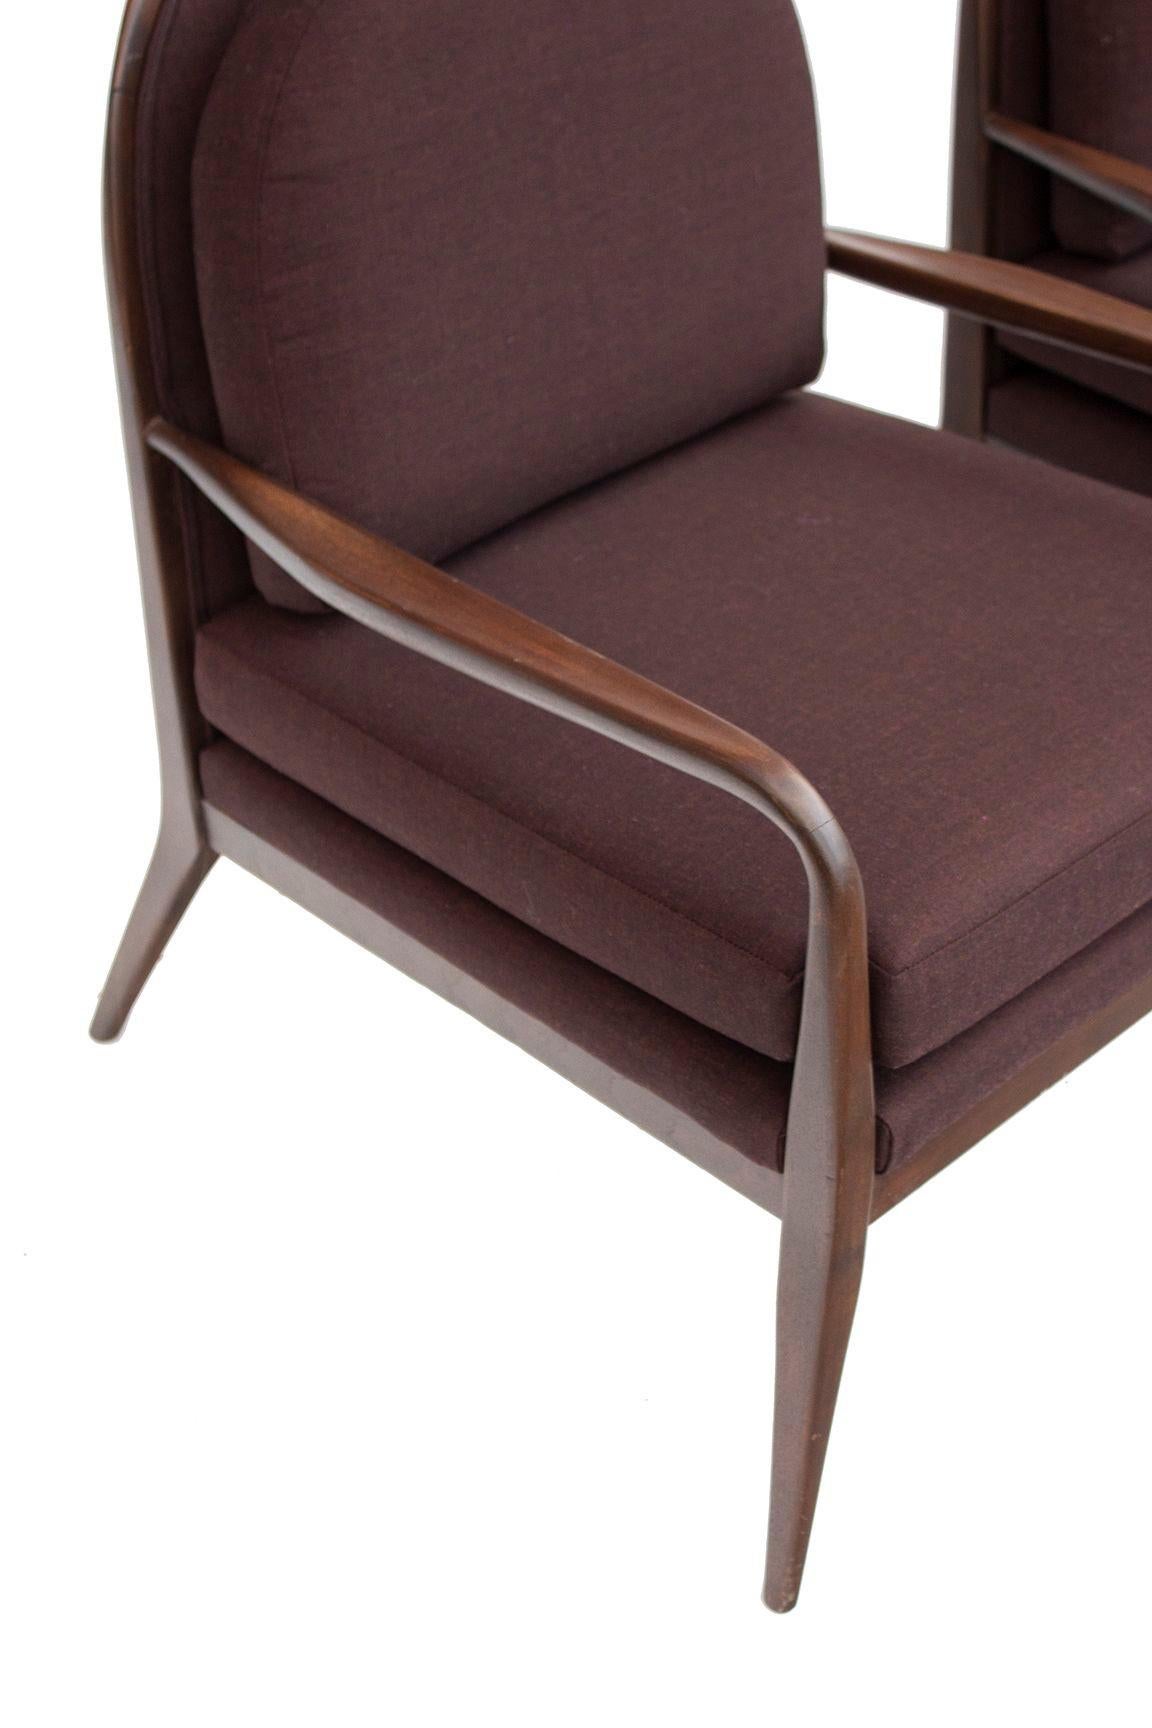 USA, 1950s
Paul McCobb for Widdicomb walnut frame armchairs, newly upholstered in a chocolatey burgundy fine wool blend with all new foam. Elegant design by Paul McCobb. Both the seat cushion and the back cushion are loose cushions (not fixed)- so